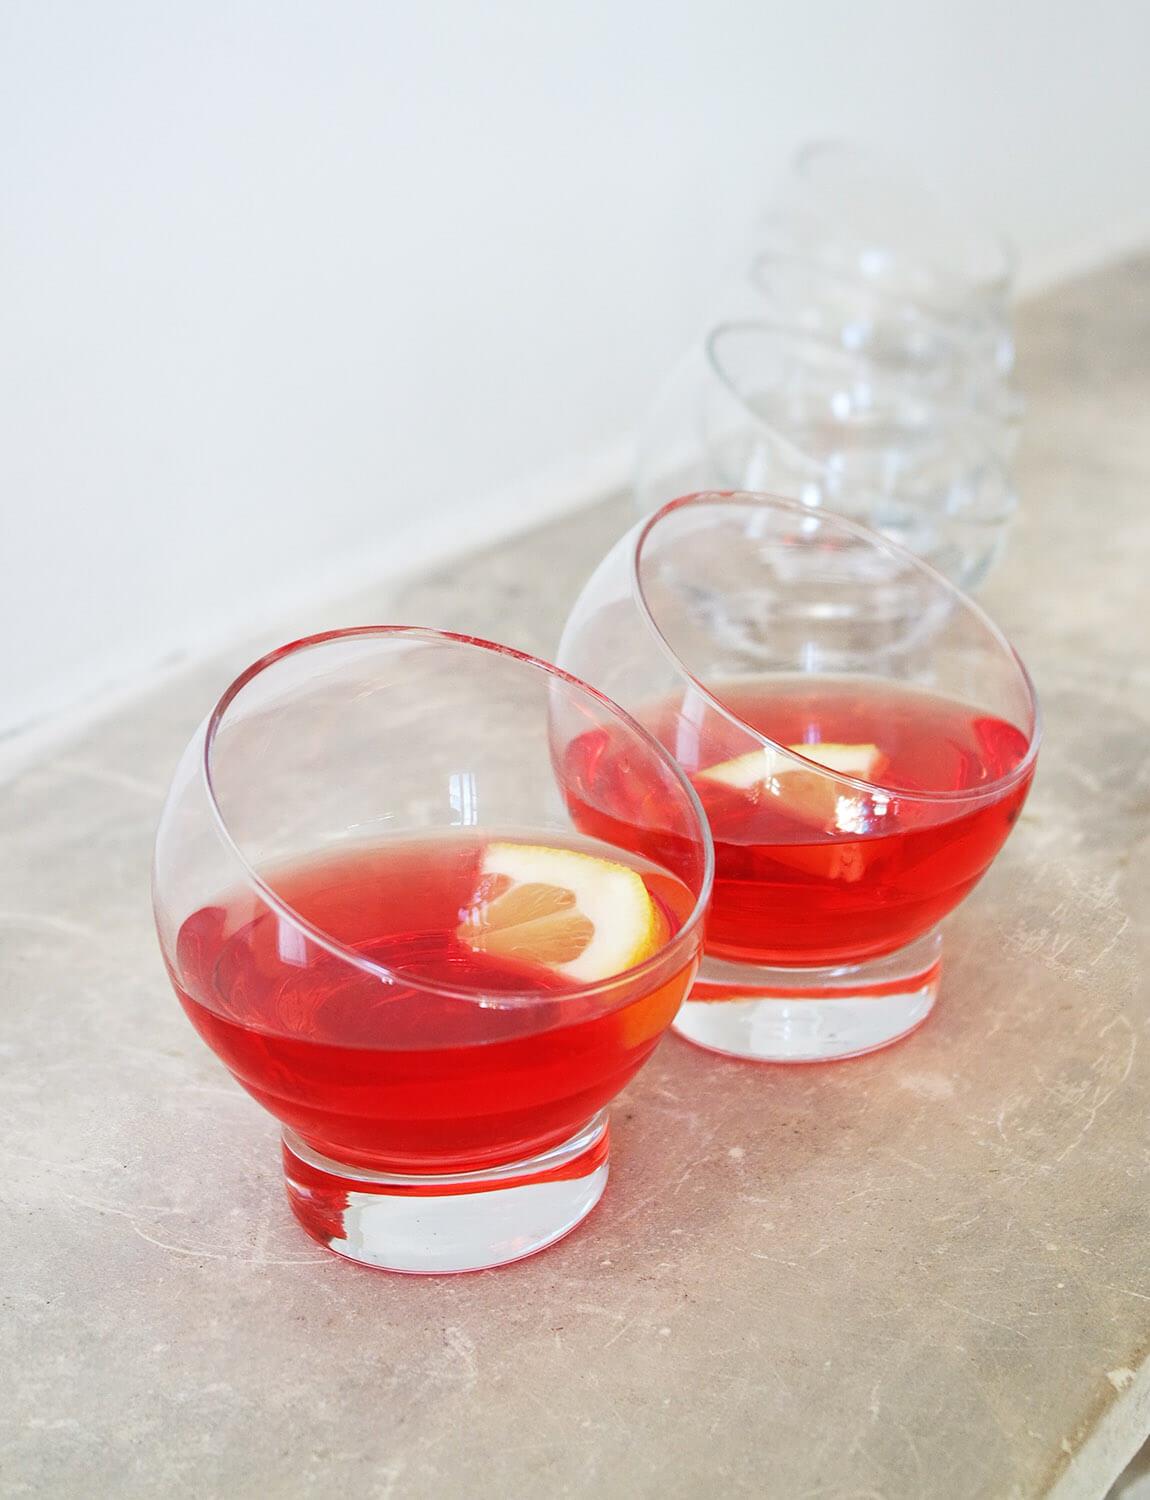 These brilliantly fun 1960s asymmetric spherical glasses were found in a market in Rome. They look fantastic holding bold aperitivi such as Campari or Aperol with big ice cubes.